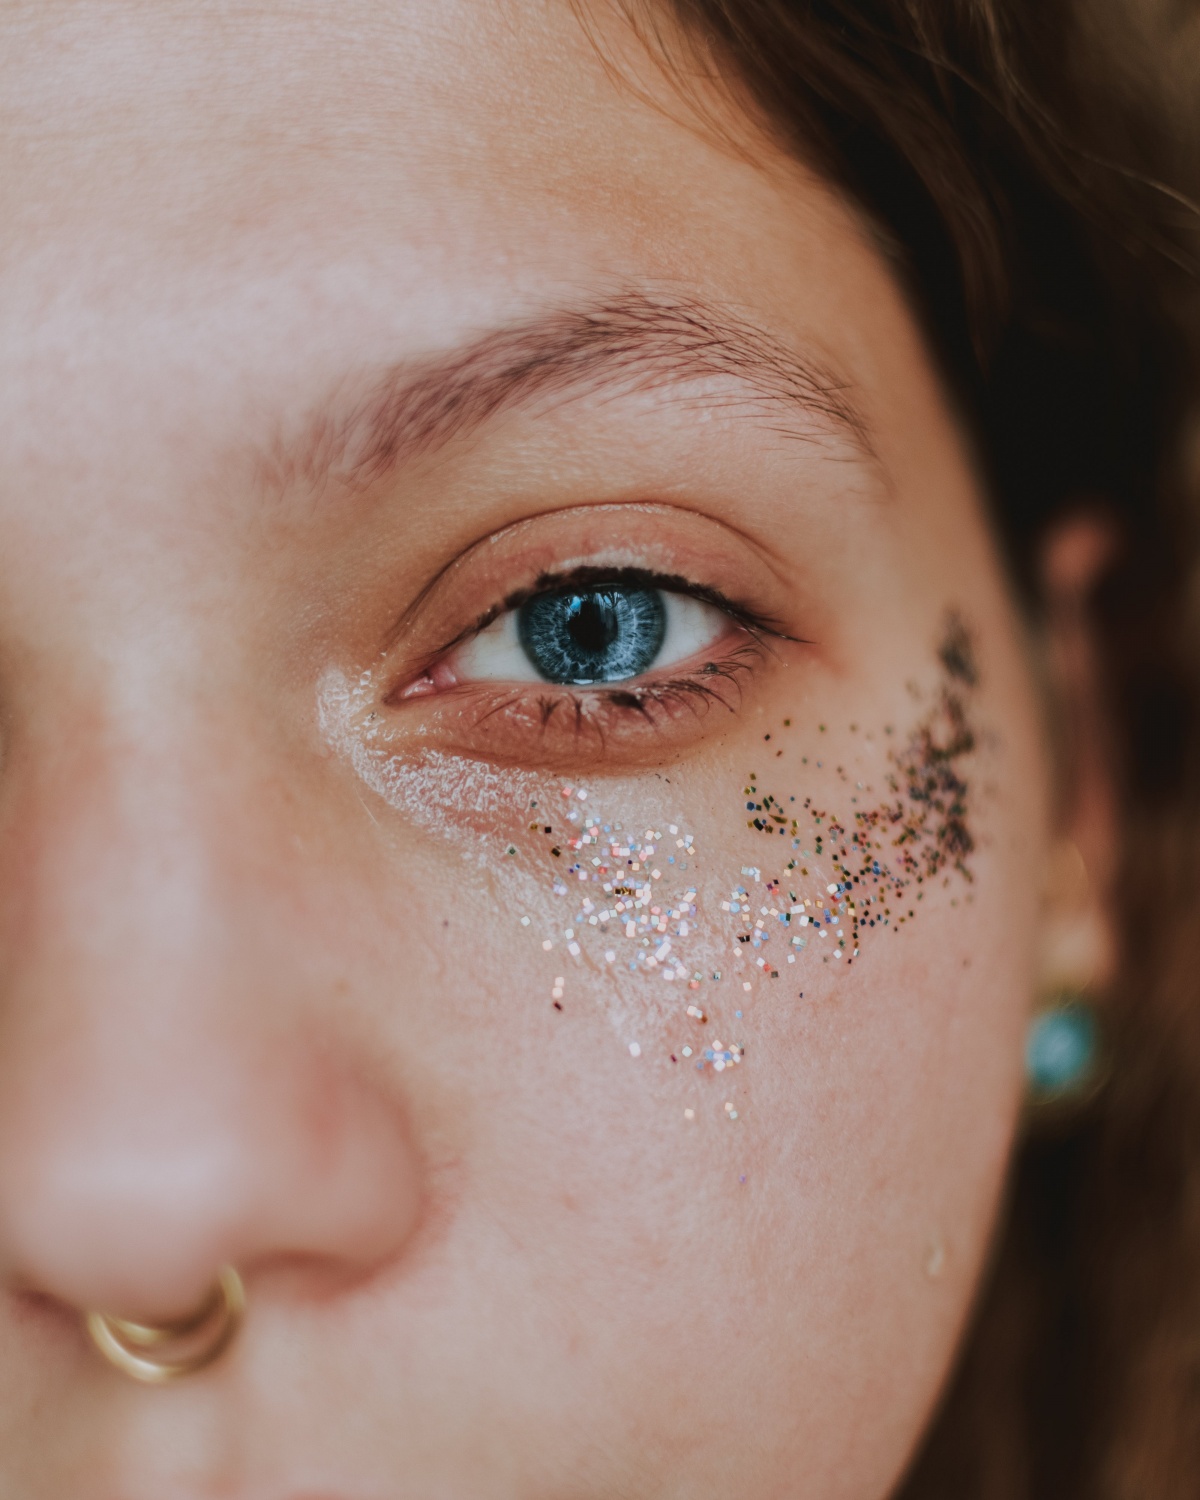 Gone Glitter Gone: What to Know About EU’s New Glitter Ban